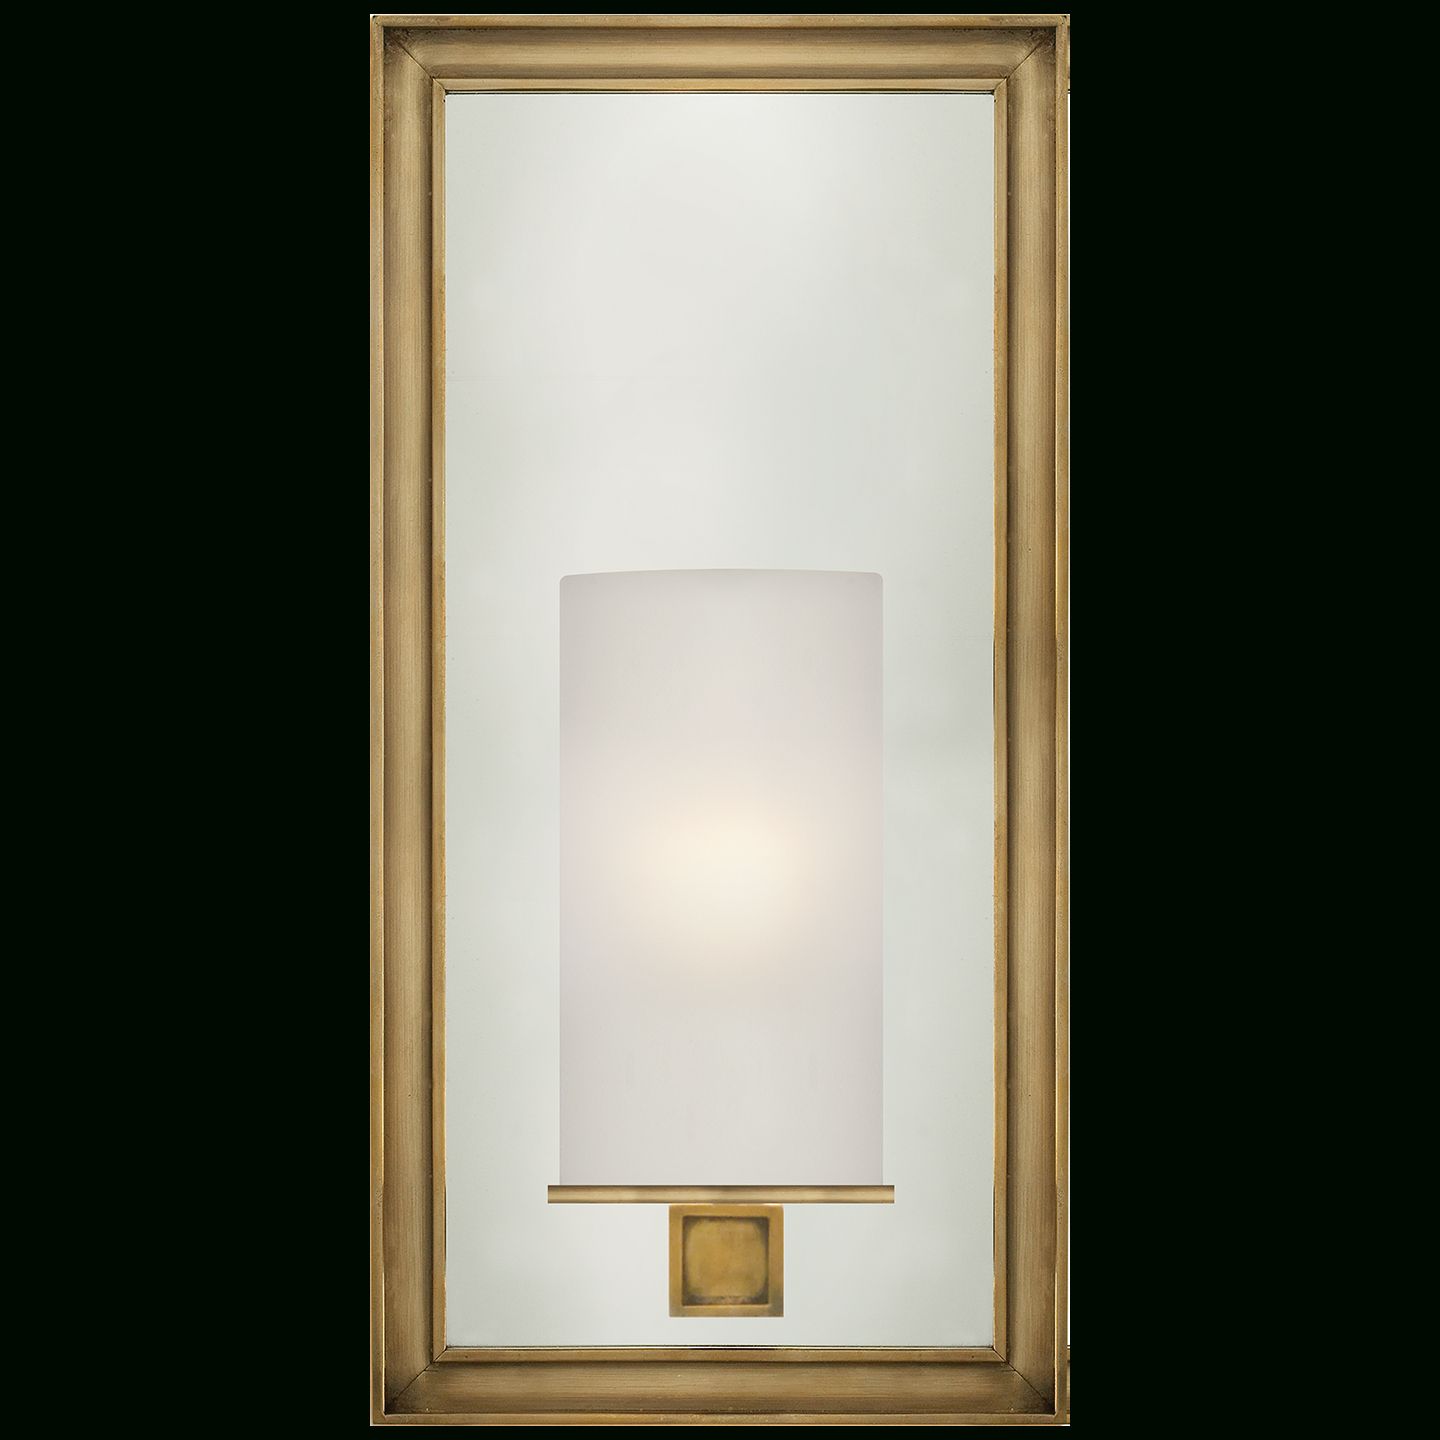 Lund 12" Single Sconce In Polished Nickel With Mirror | Sconces, Wall With Single Sided Polished Nickel Wall Mirrors (View 14 of 15)